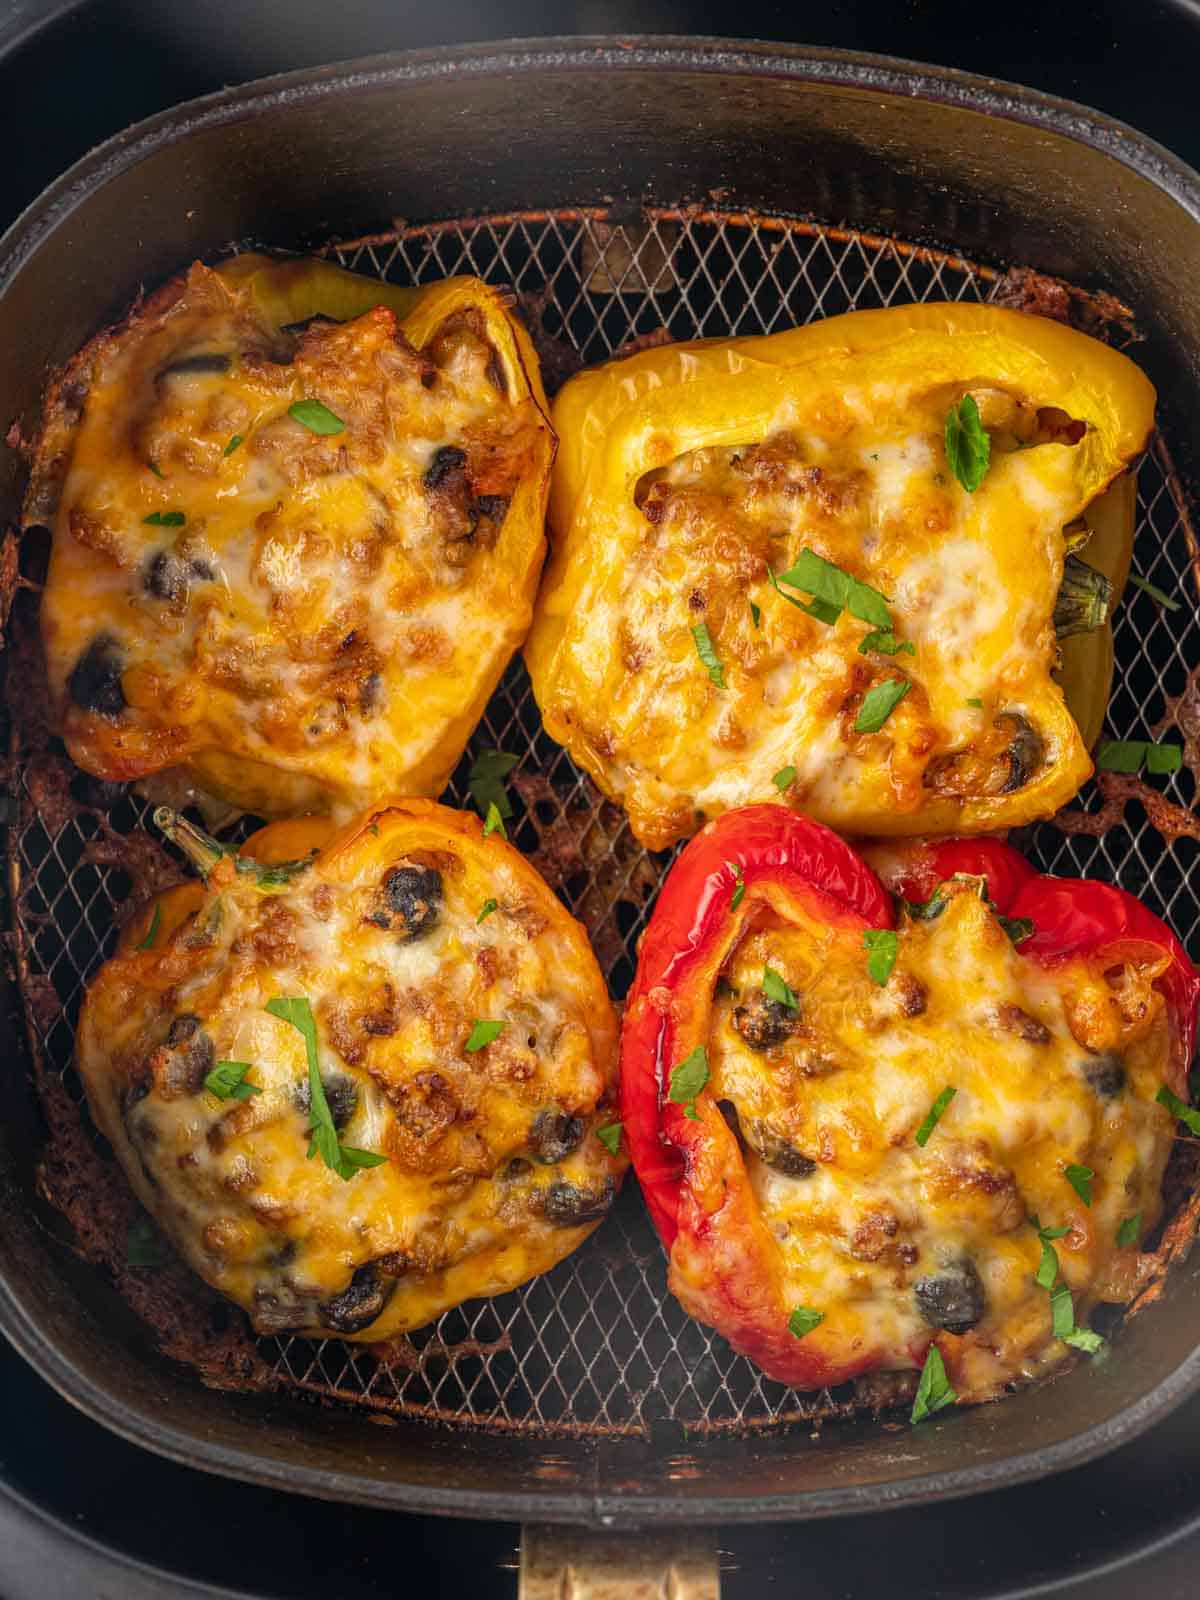 Cheese melted over stuffed peppers in air fryer.